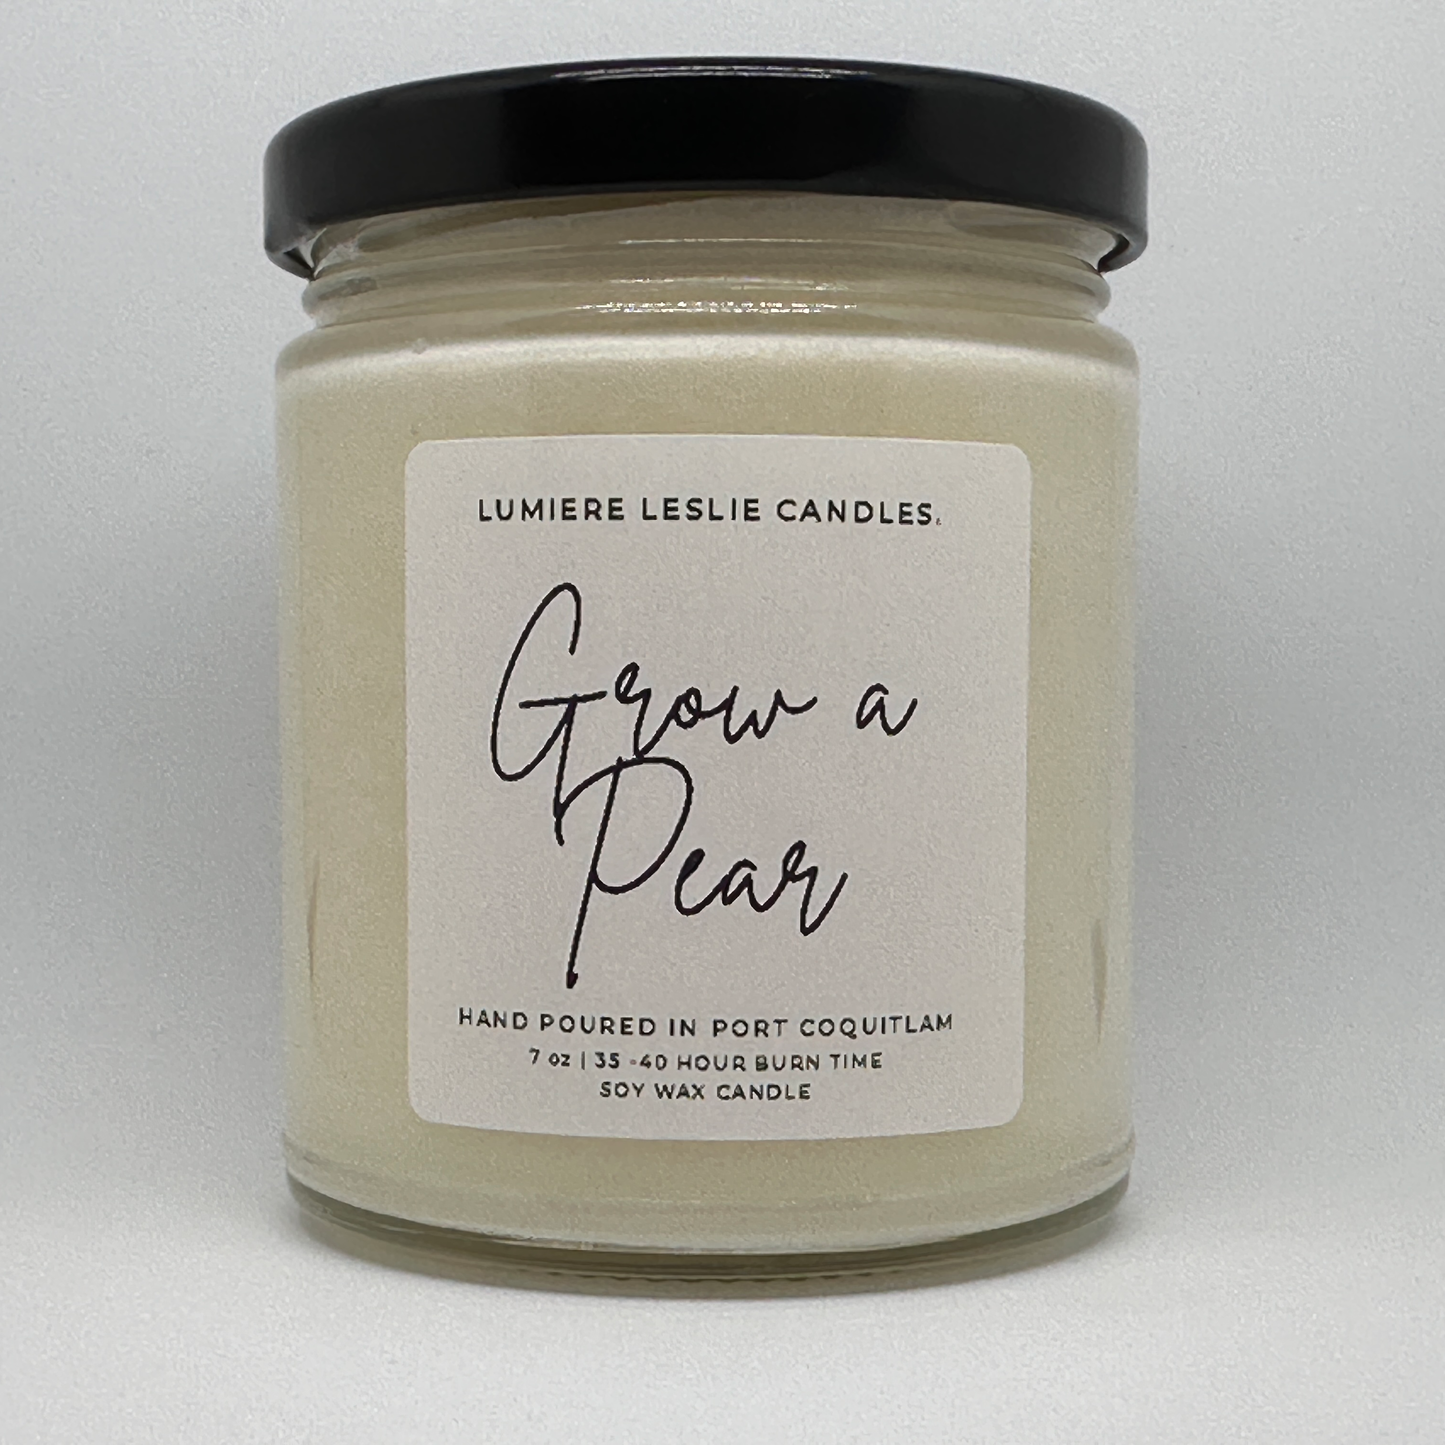 Handmade Soy Candles